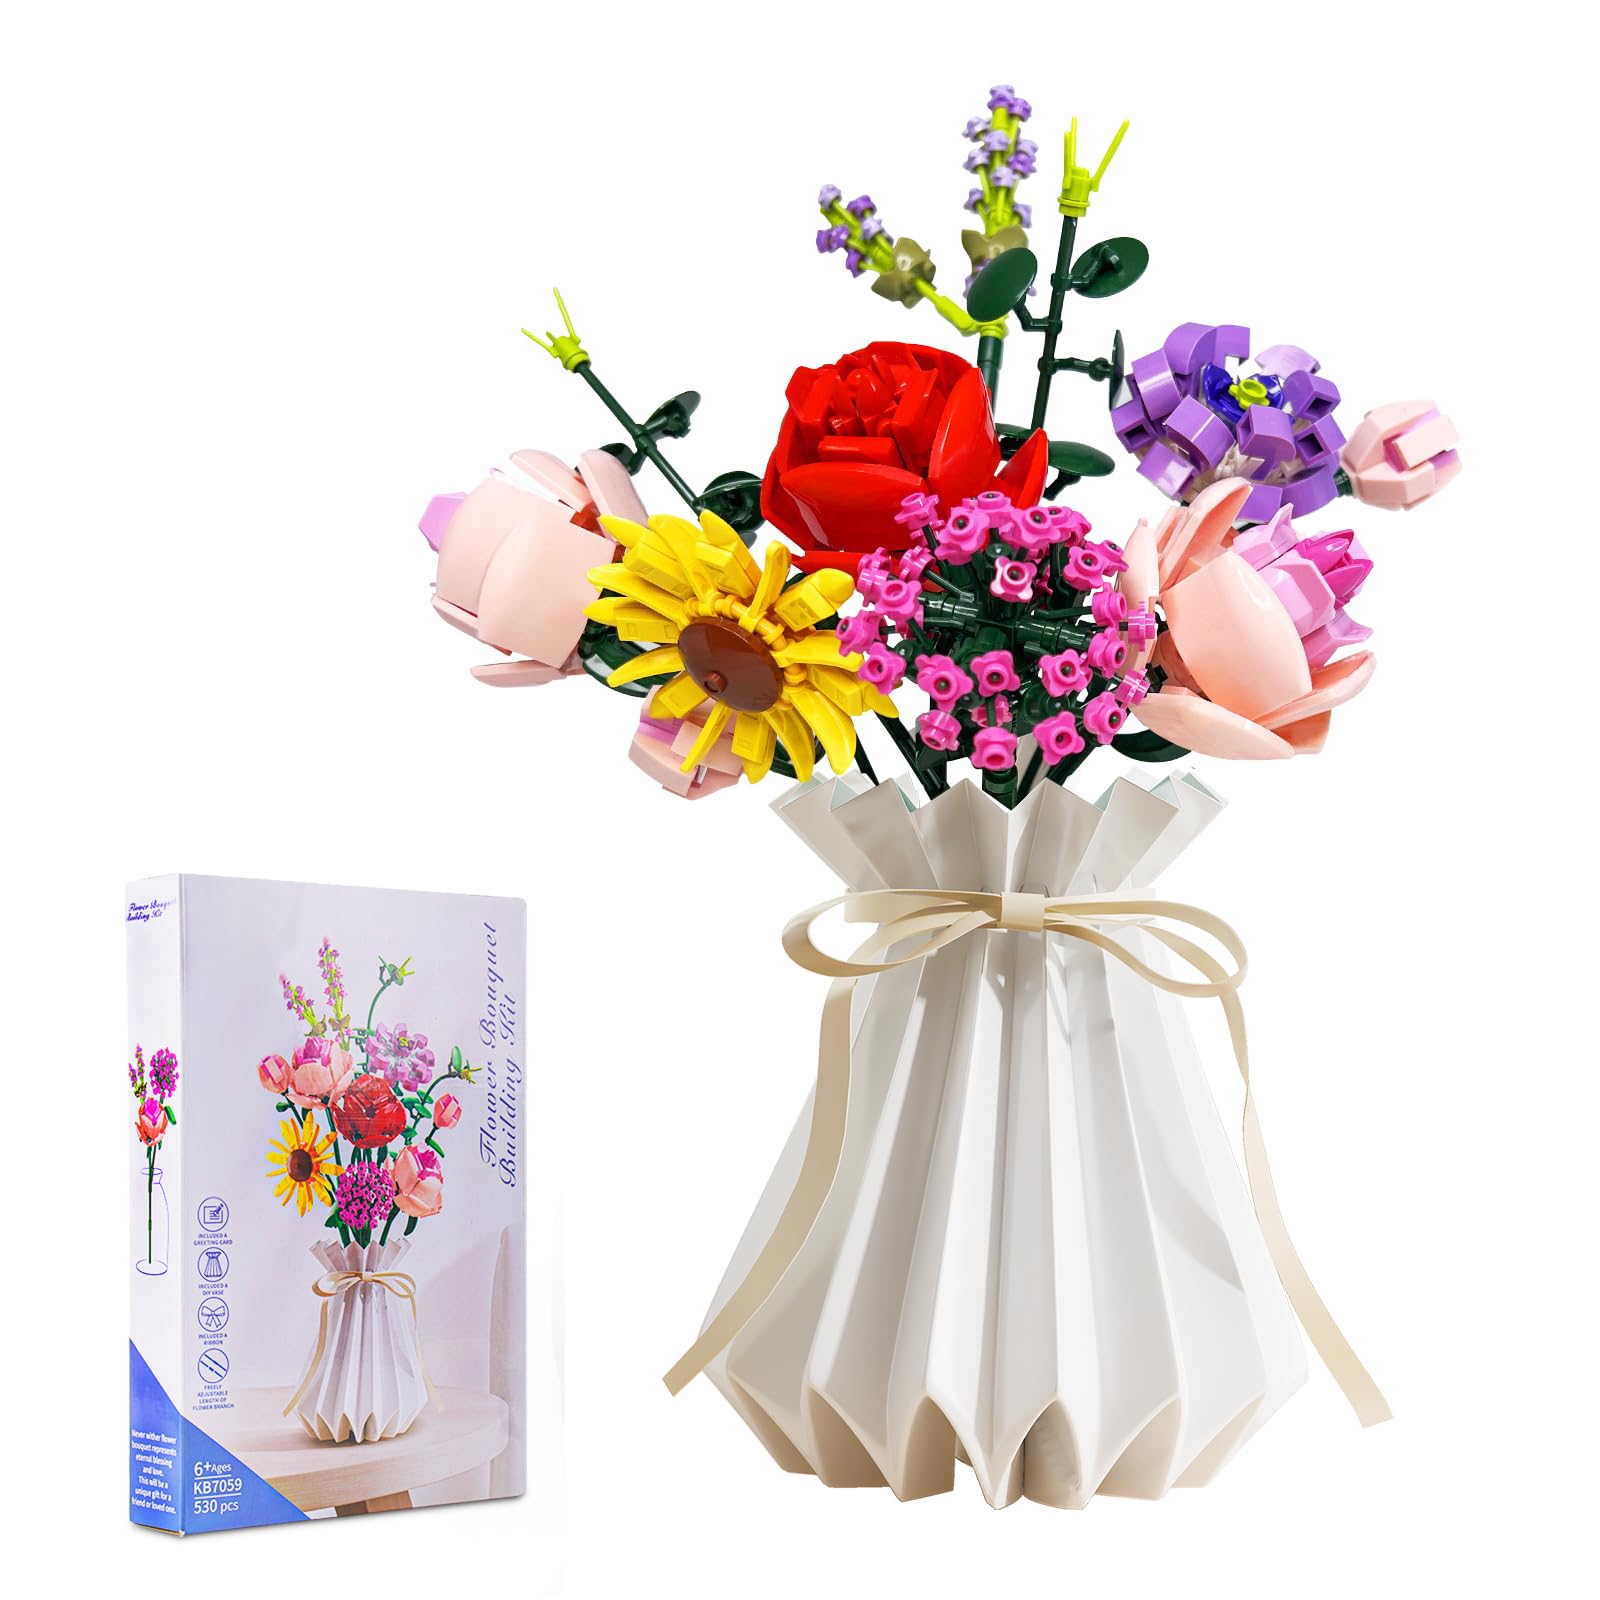 UJYY 2023 Flower Bouquet Building Kit, 11 Artificial Flowers Building Toys, 530 PCS Flower Building Blocks with Vase, Botanical Collection for Home Decoration, Gifts for Women Mother Kids 6+Ages